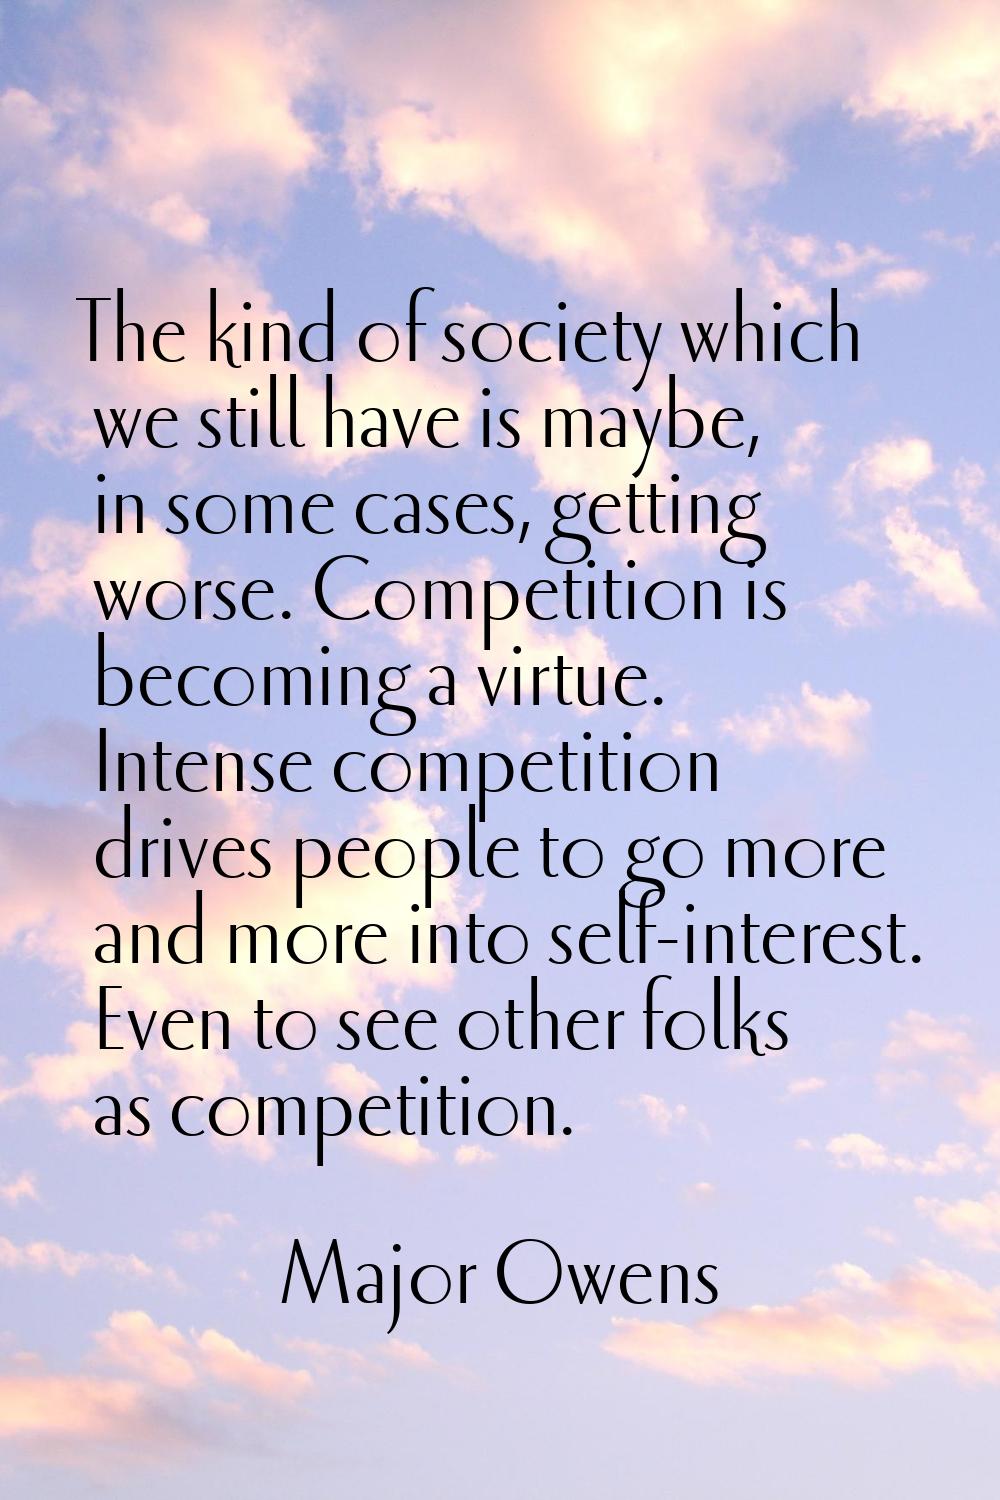 The kind of society which we still have is maybe, in some cases, getting worse. Competition is beco